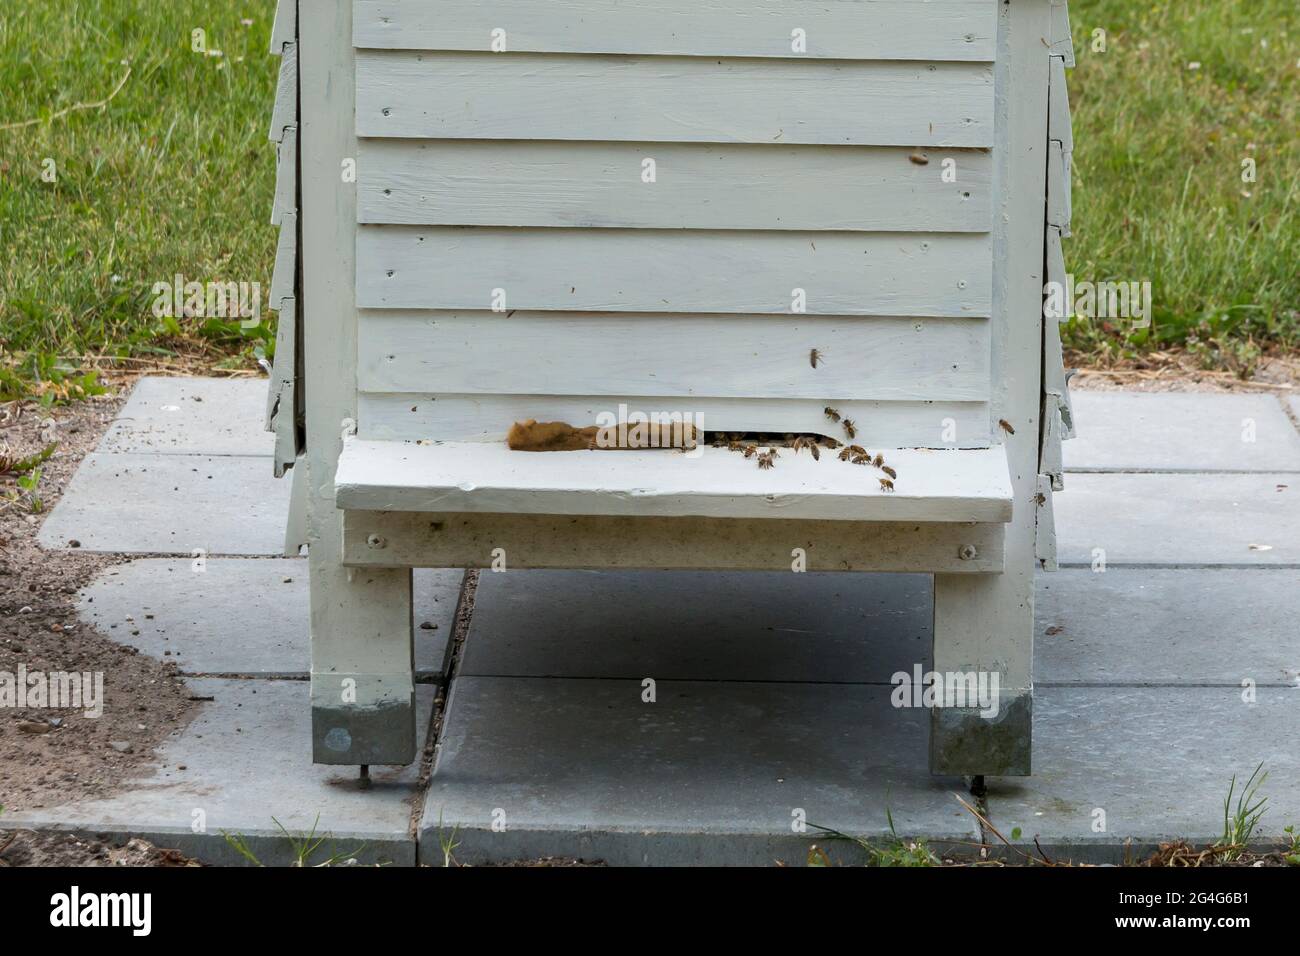 Auning, Langstroth hive filled with bees which is used for honey production Stock Photo